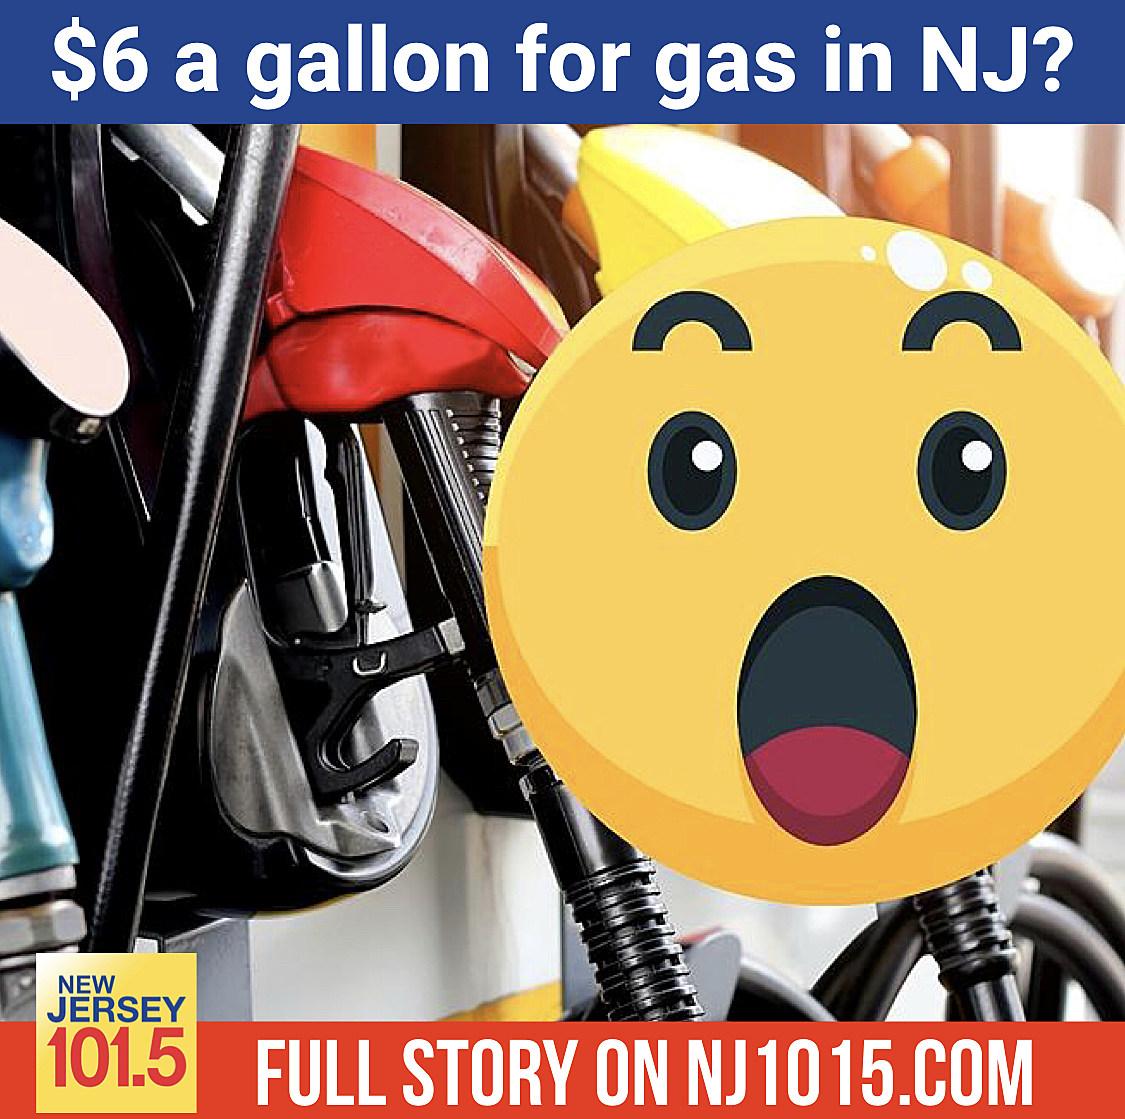 Nearly $6 a gallon? This could be the most expensive gas in NJ